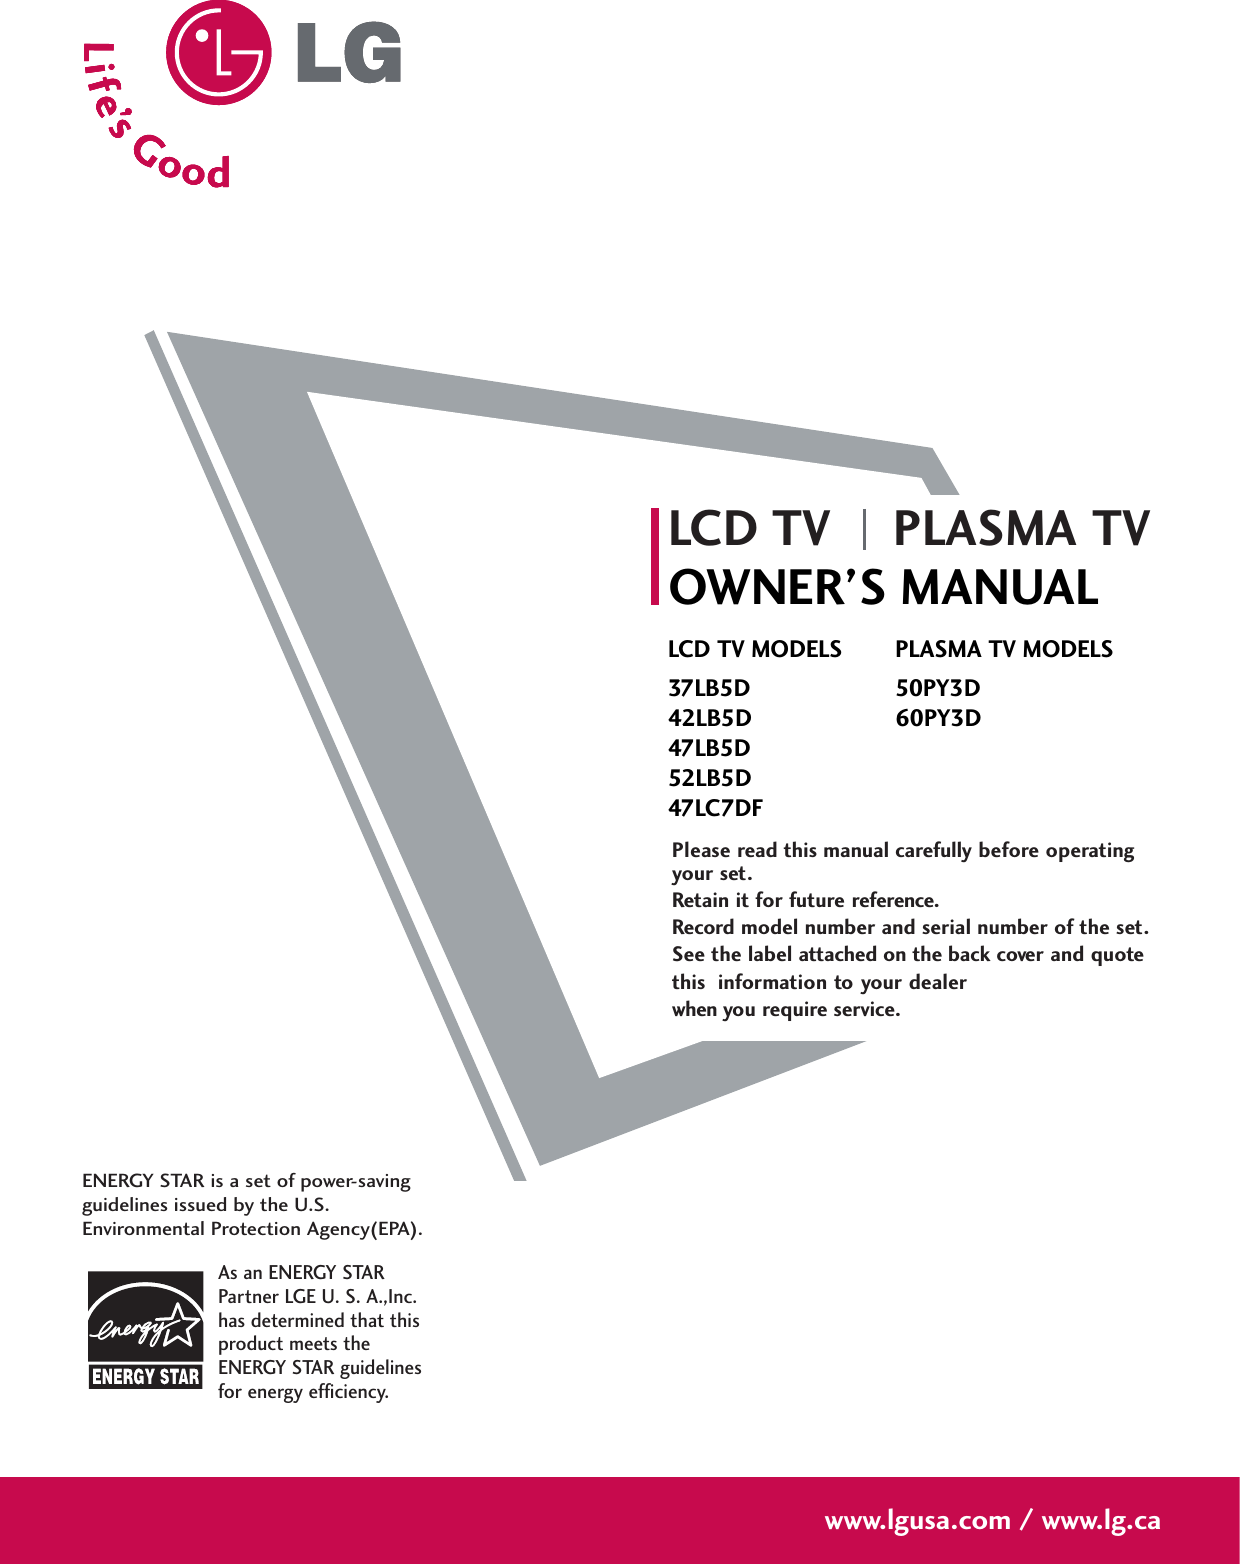 Please read this manual carefully before operatingyour set. Retain it for future reference.Record model number and serial number of the set. See the label attached on the back cover and quote this  information to your dealer when you require service.LCD TV PLASMA TVOWNER’S MANUALLCD TV MODELS37LB5D42LB5D47LB5D52LB5D47LC7DFPLASMA TV MODELS50PY3D60PY3Dwww.lgusa.com / www.lg.caAs an ENERGY STARPartner LGE U. S. A.,Inc.has determined that thisproduct meets theENERGY STAR guidelinesfor energy efficiency.ENERGY STAR is a set of power-savingguidelines issued by the U.S.Environmental Protection Agency(EPA).